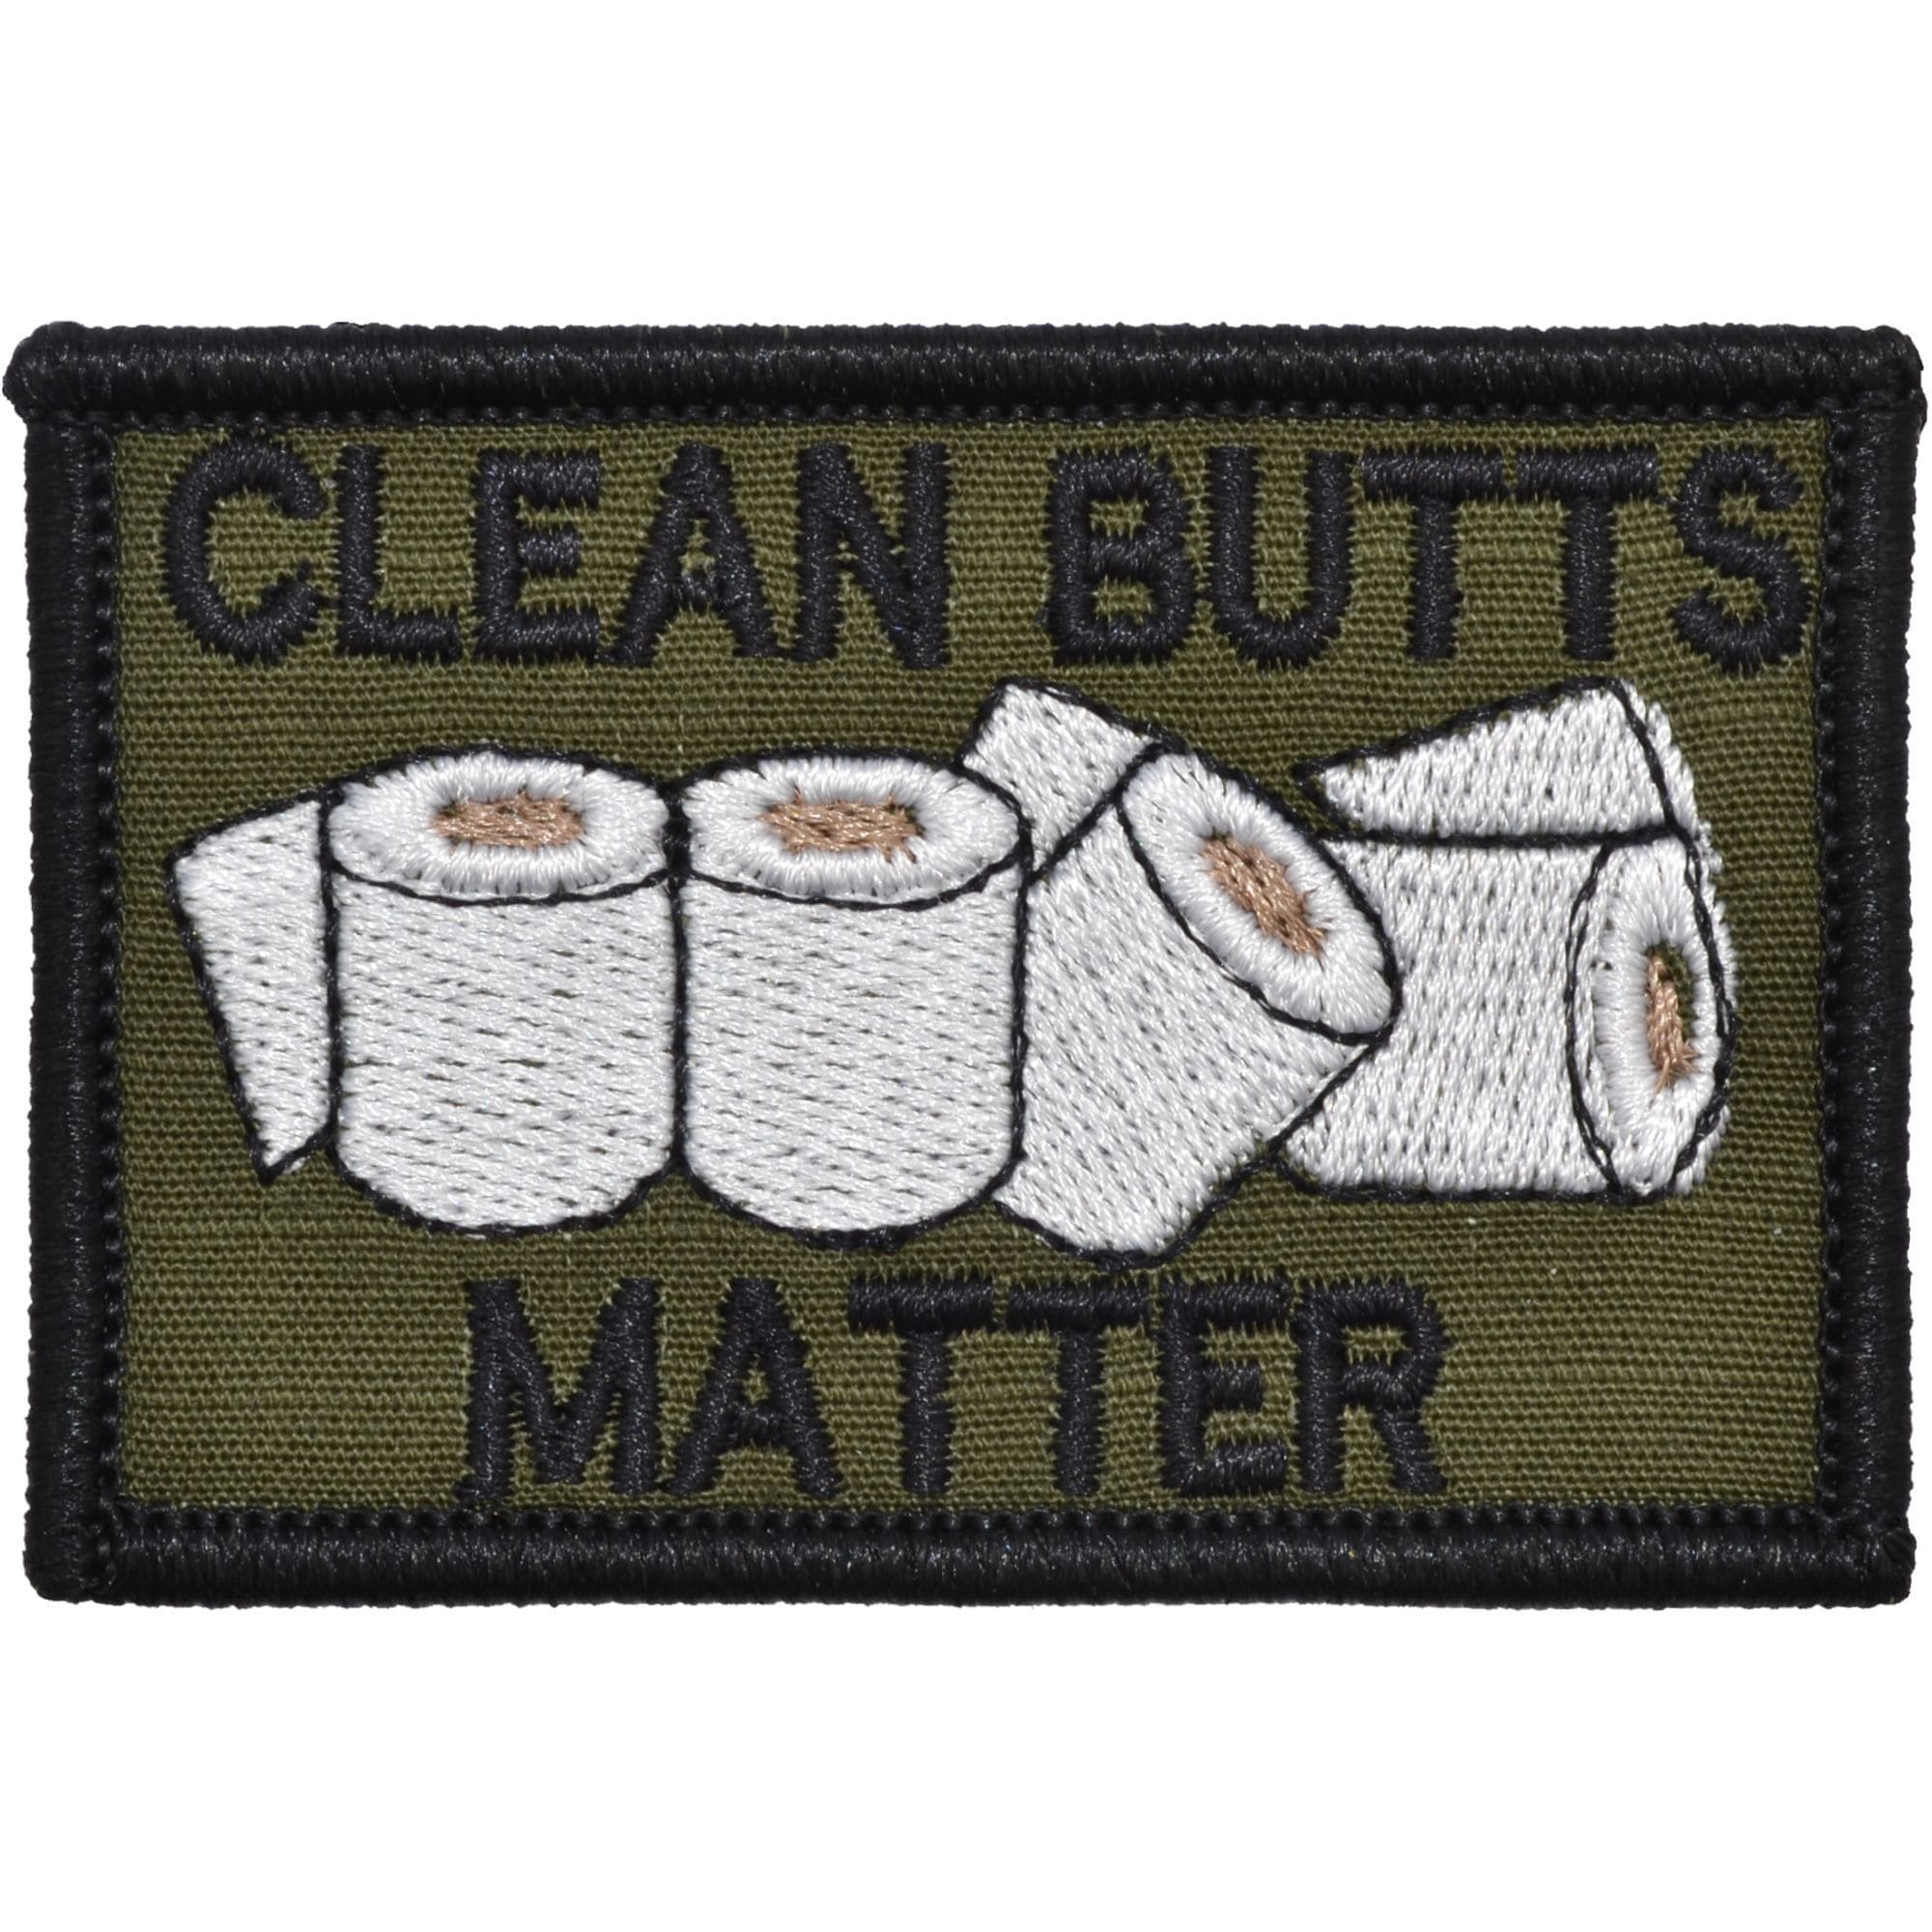 Tactical Gear Junkie Patches Olive Drab Clean Butts Matter - 2x3 Patch